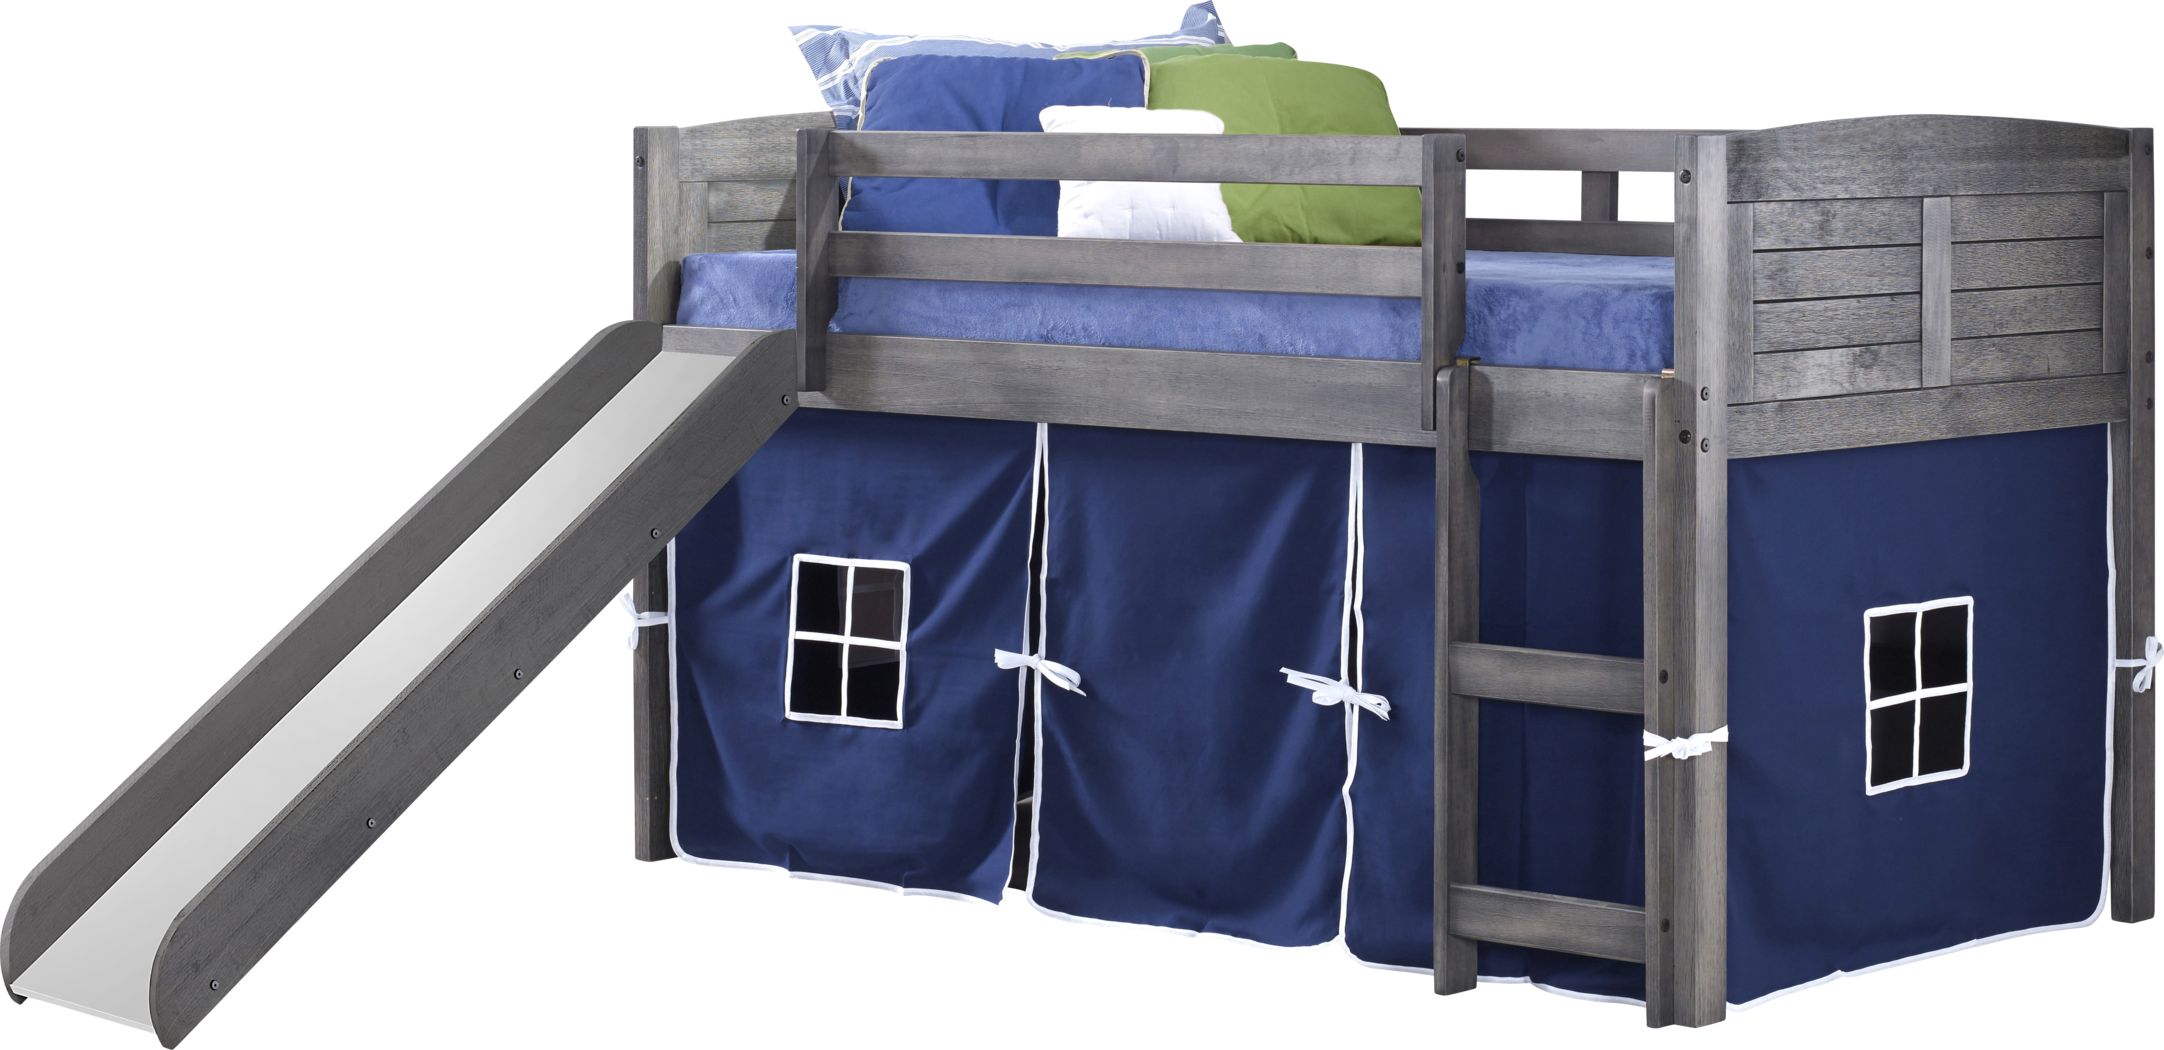 Rooms To Go Kids Furniture, Bunk Beds For Kids Rooms To Go